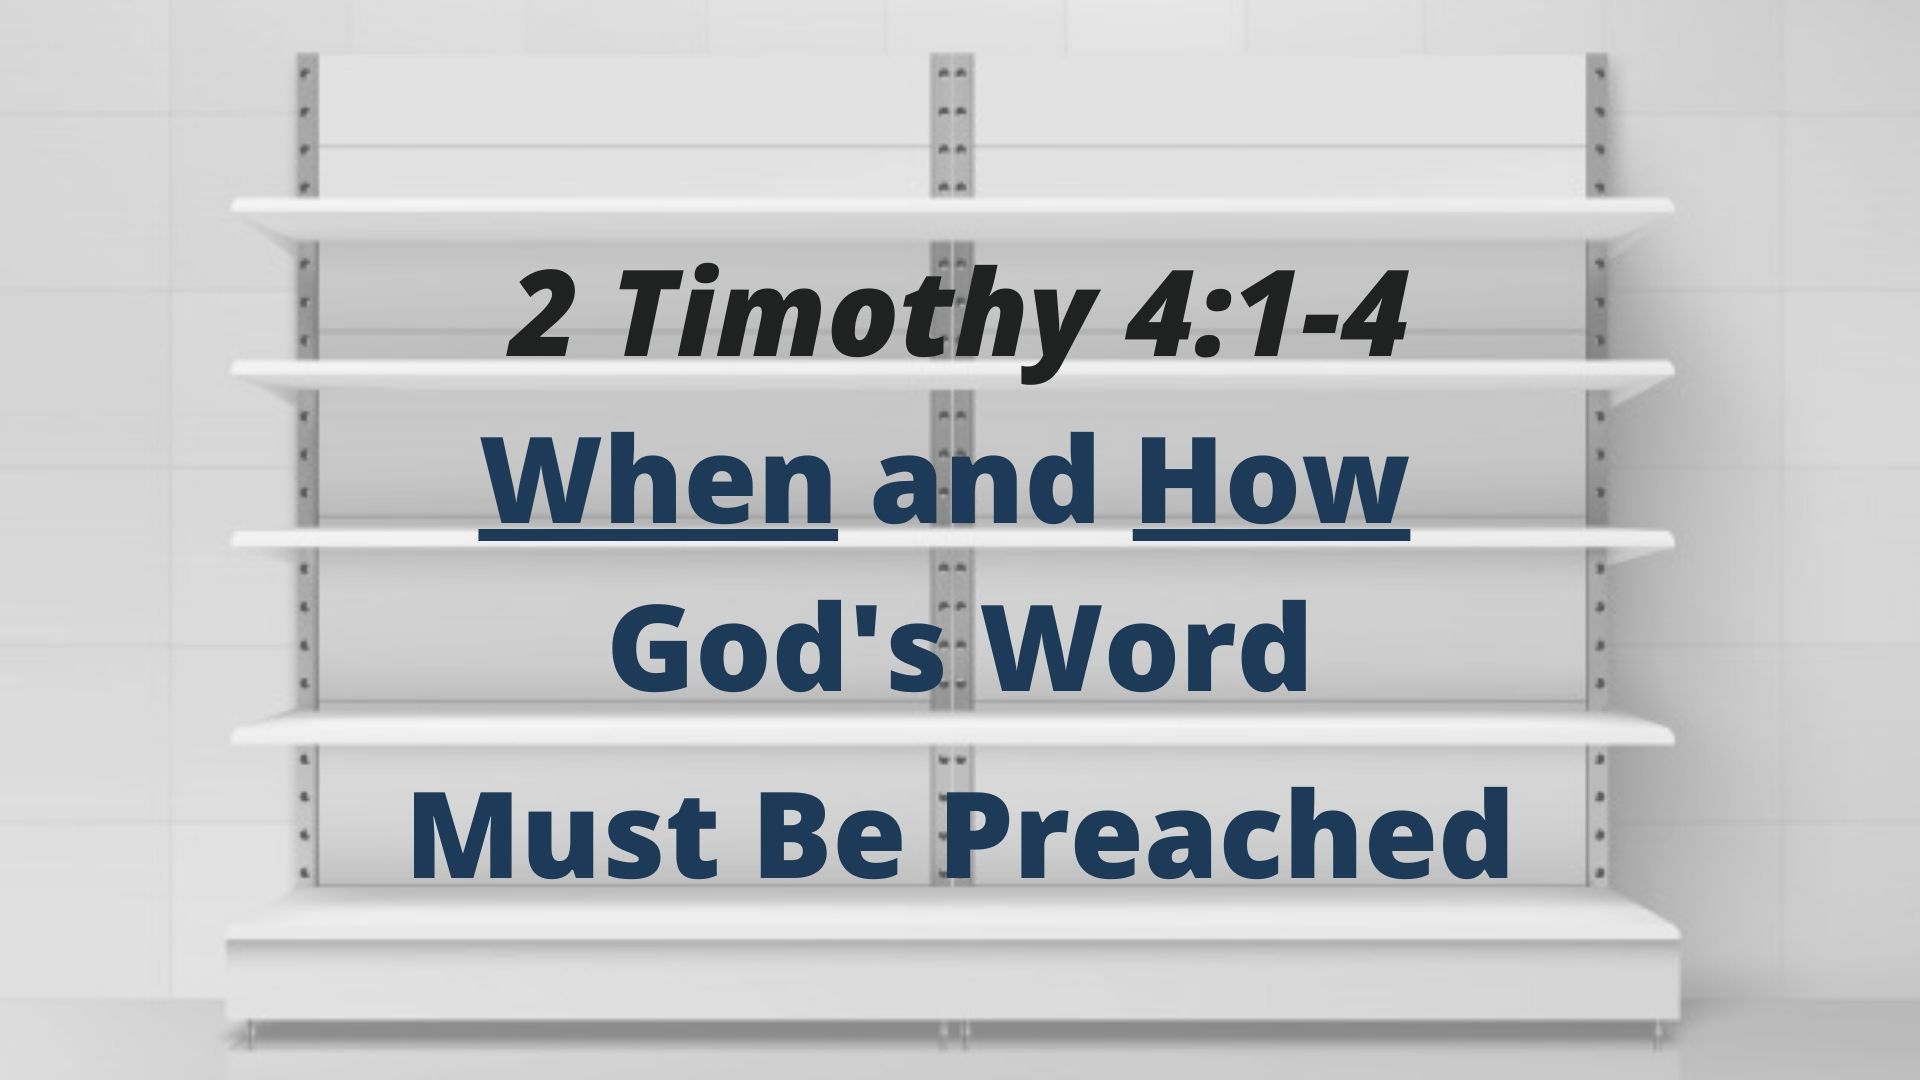 When and How God's Word Must Be Preached (2 Timothy 4:1-4) Image